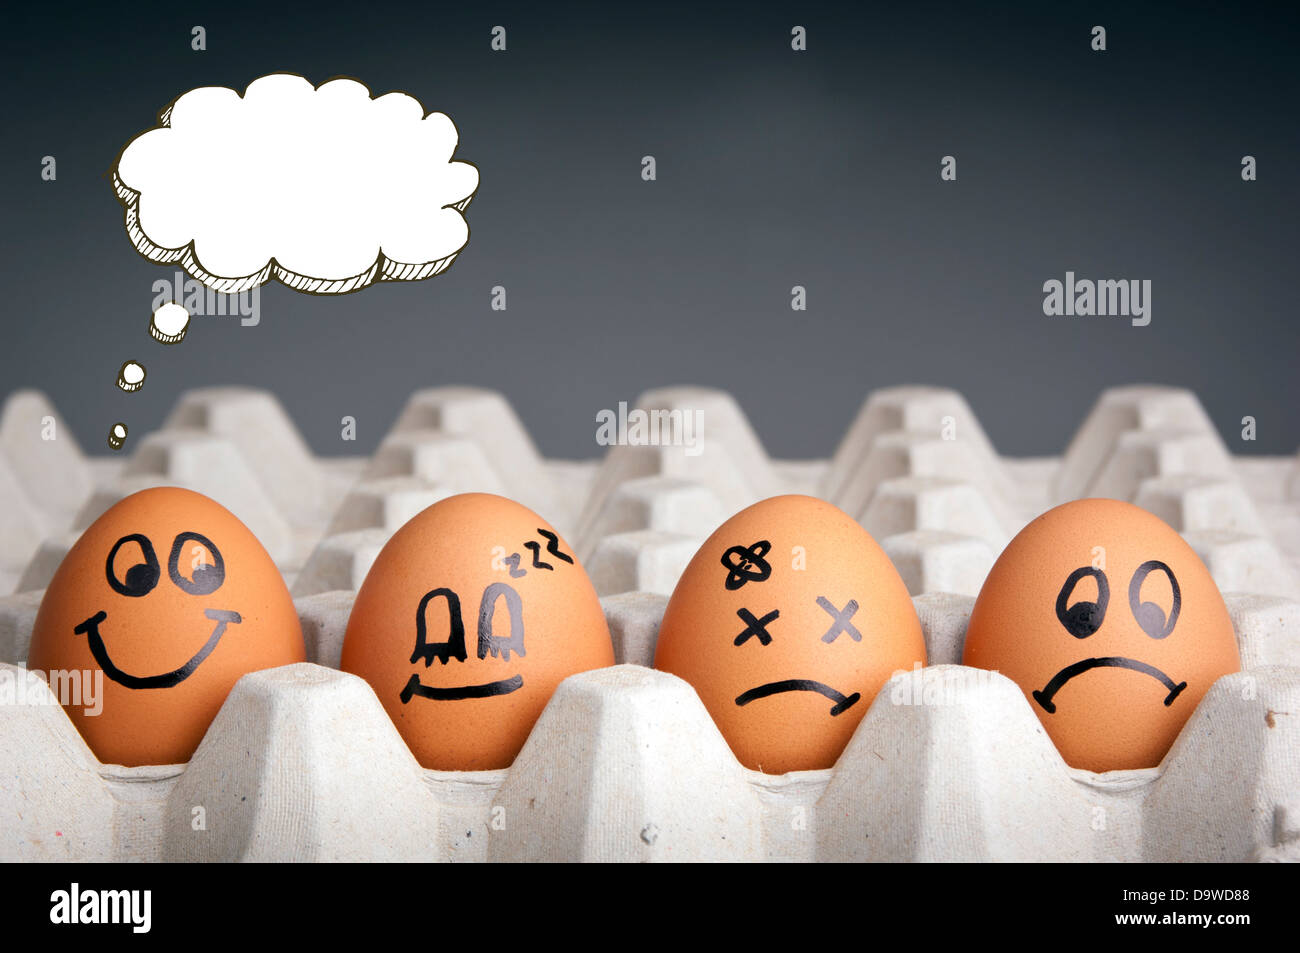 Mental health concept in playful style with egg characters displaying different emotions and blank speech bubbles Stock Photo